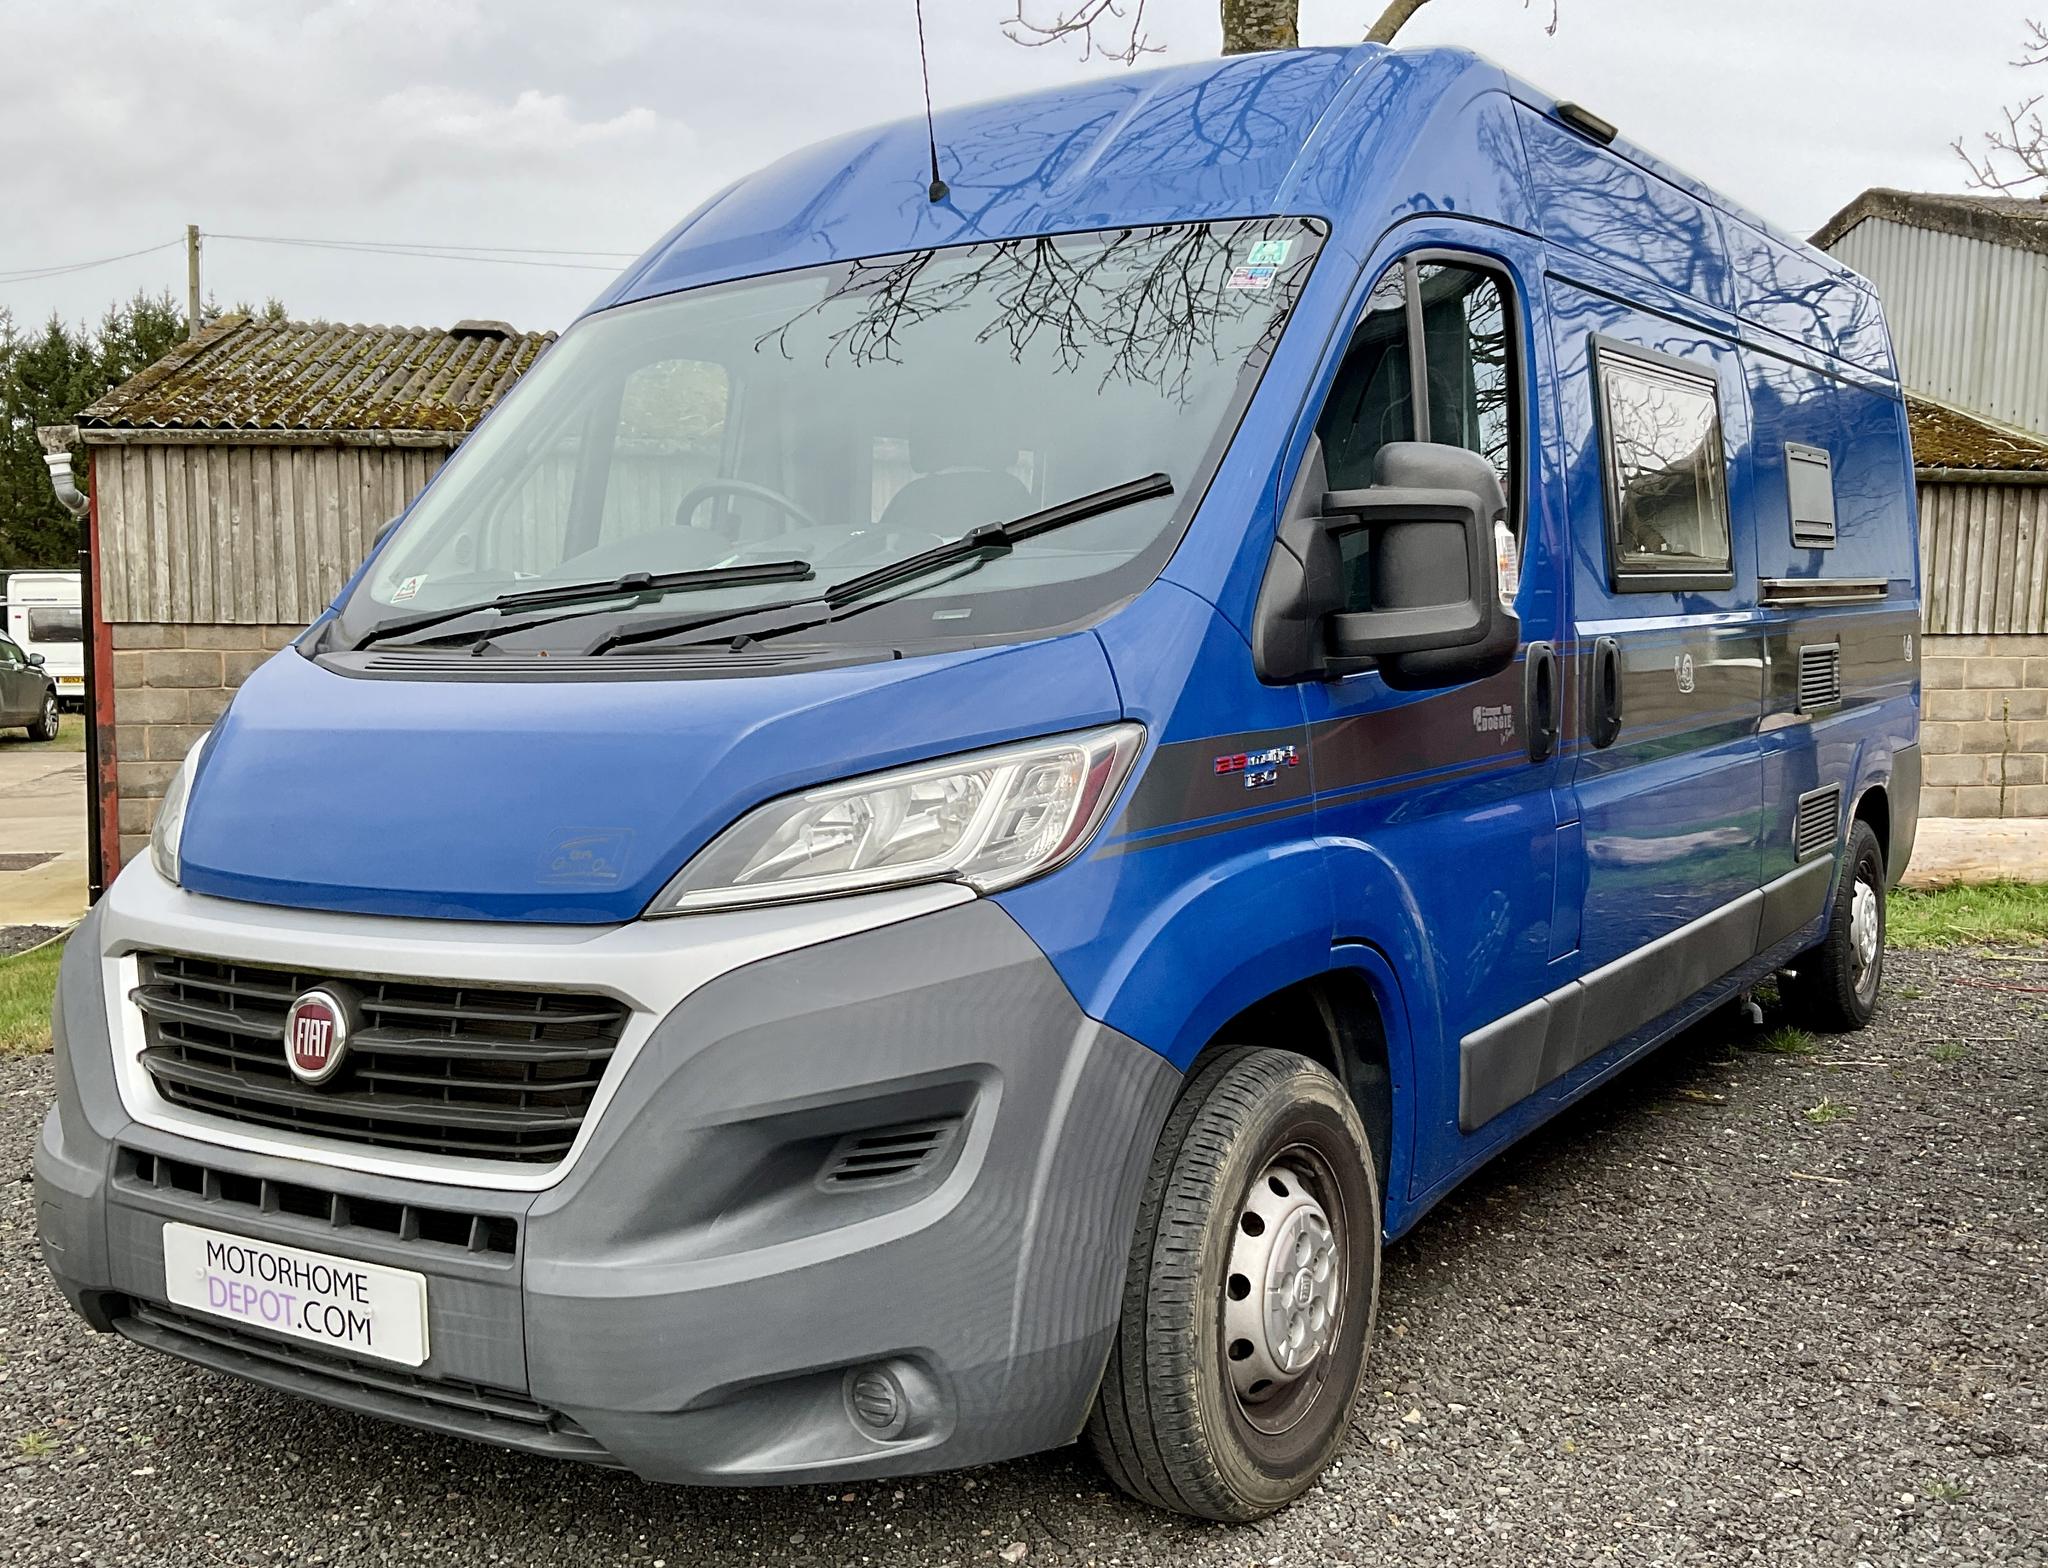 Used Fiat Ducato Motorhomes for sale